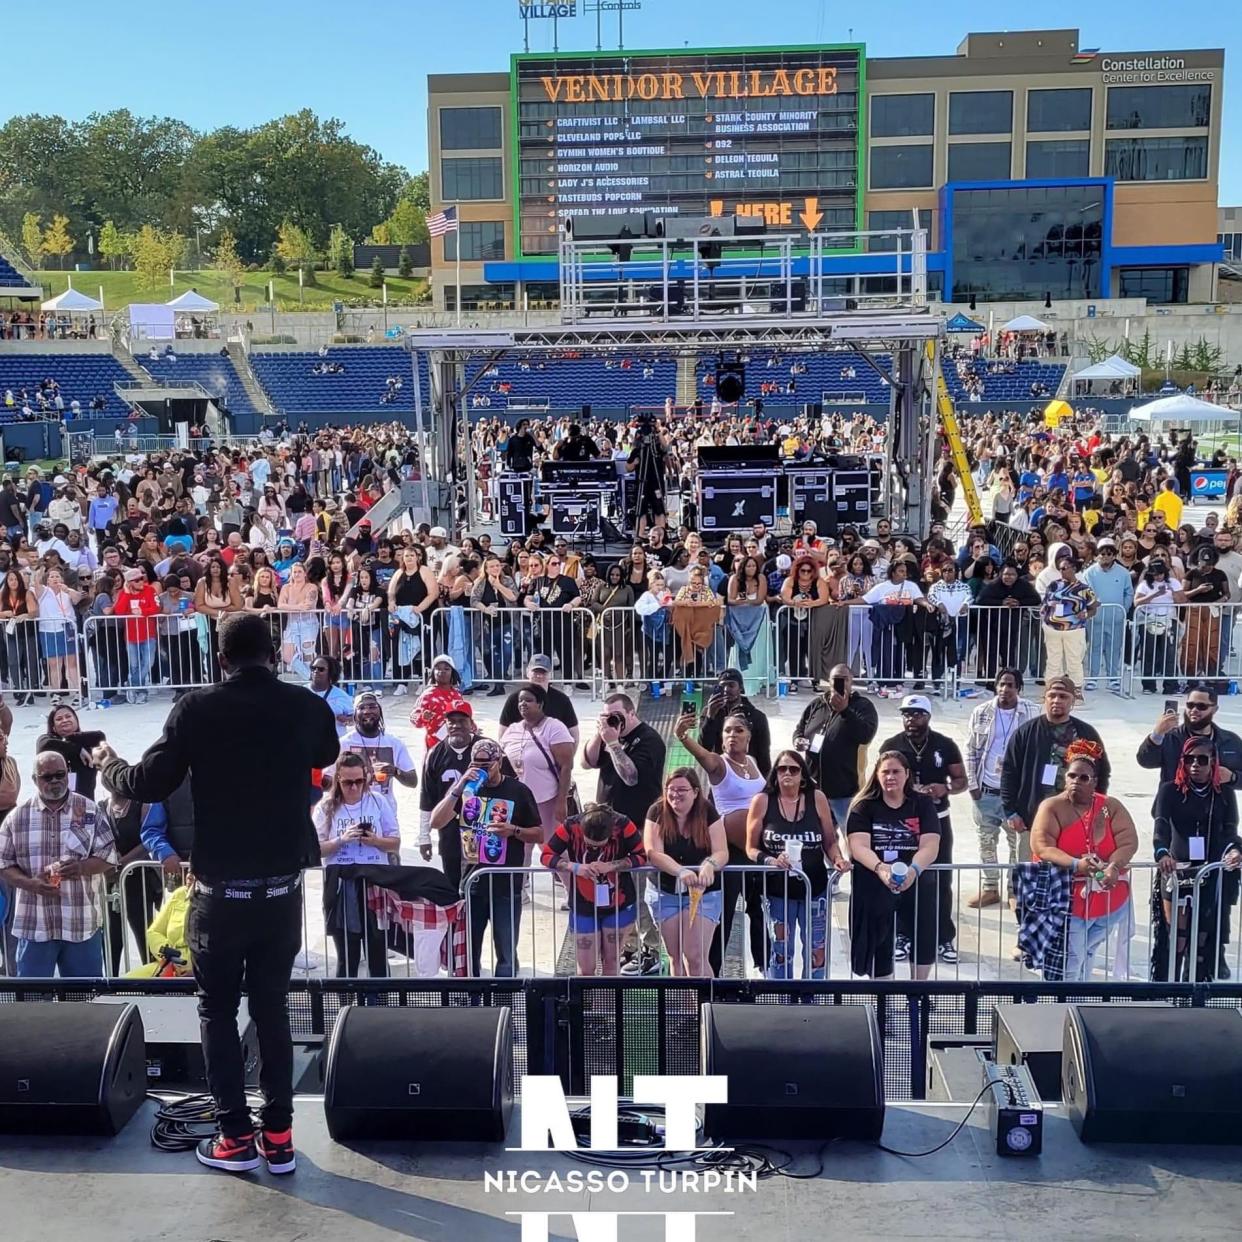 Canton-based hip-hop artist and rapper Nicasso Turpin is shown performing at the Hall of Fame Village in September at the Tacos & Tequila Music Fest at Tom Benson Hall of Fame Stadium.